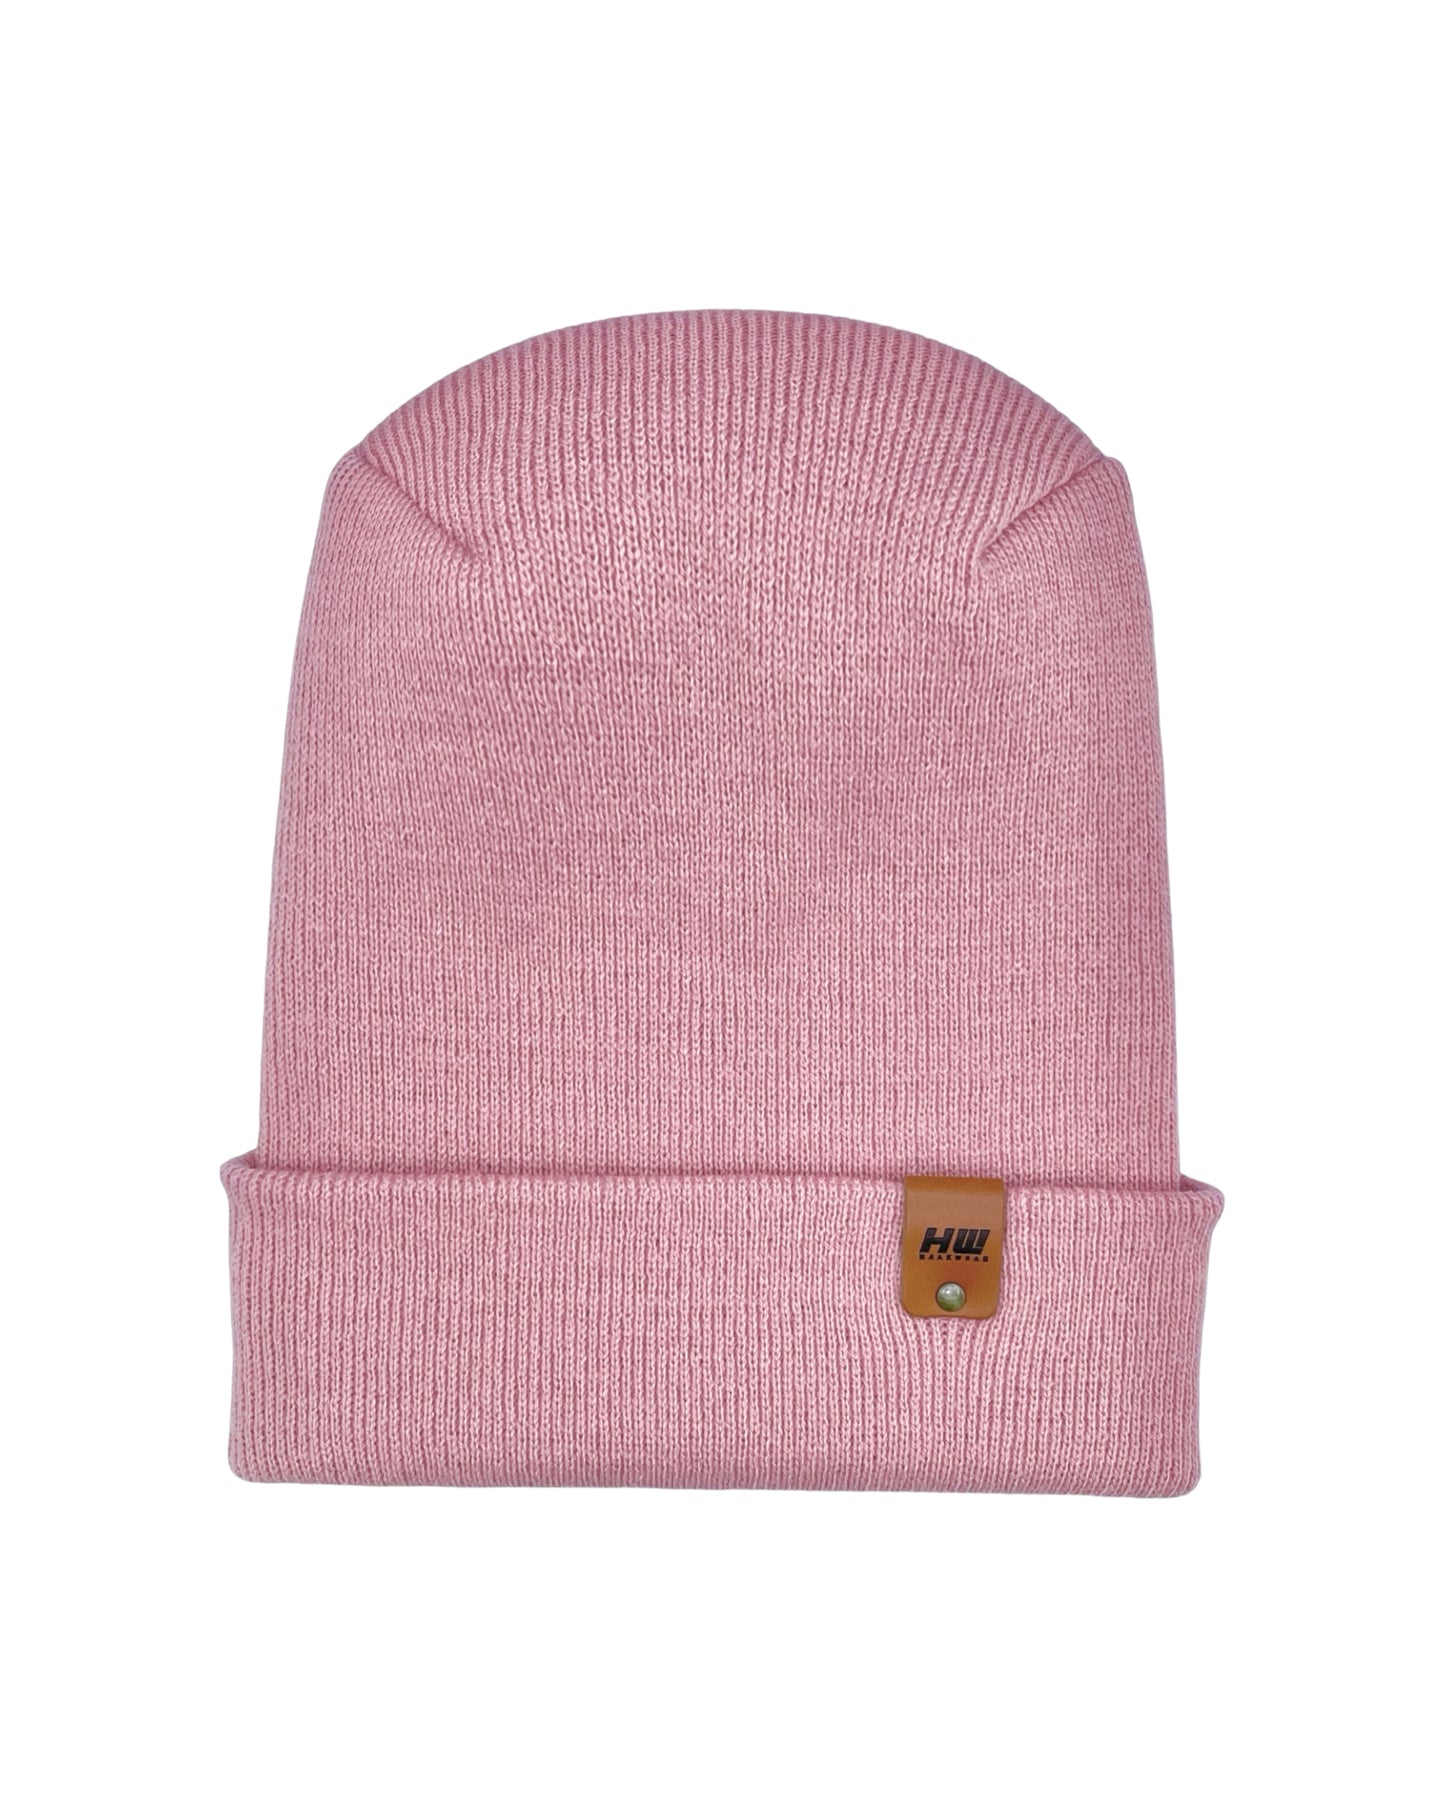 NEW HAAKWEAR Theta-Stitch Cuffed Beanie - Designed and Made in USA (Patent Pending Design) - Pearl Pink